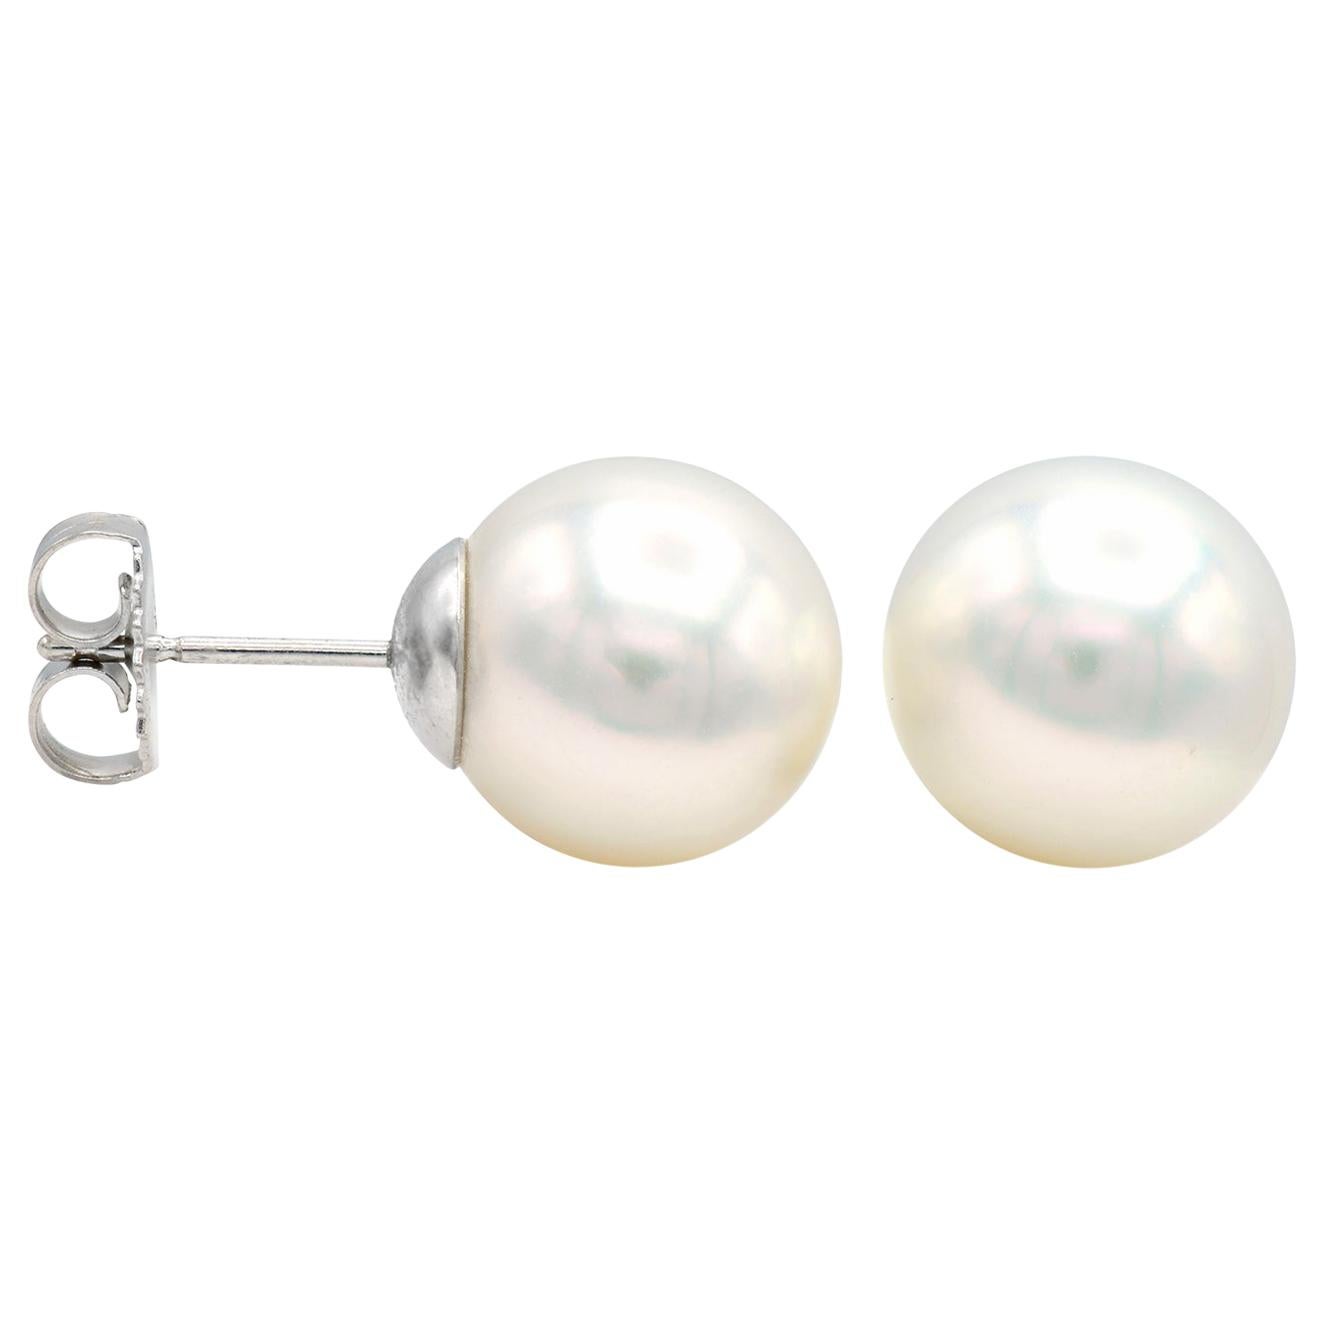 9.5-10mm South Sea Pearl Stud Earrings with 14 Karat White Gold Post and Back For Sale